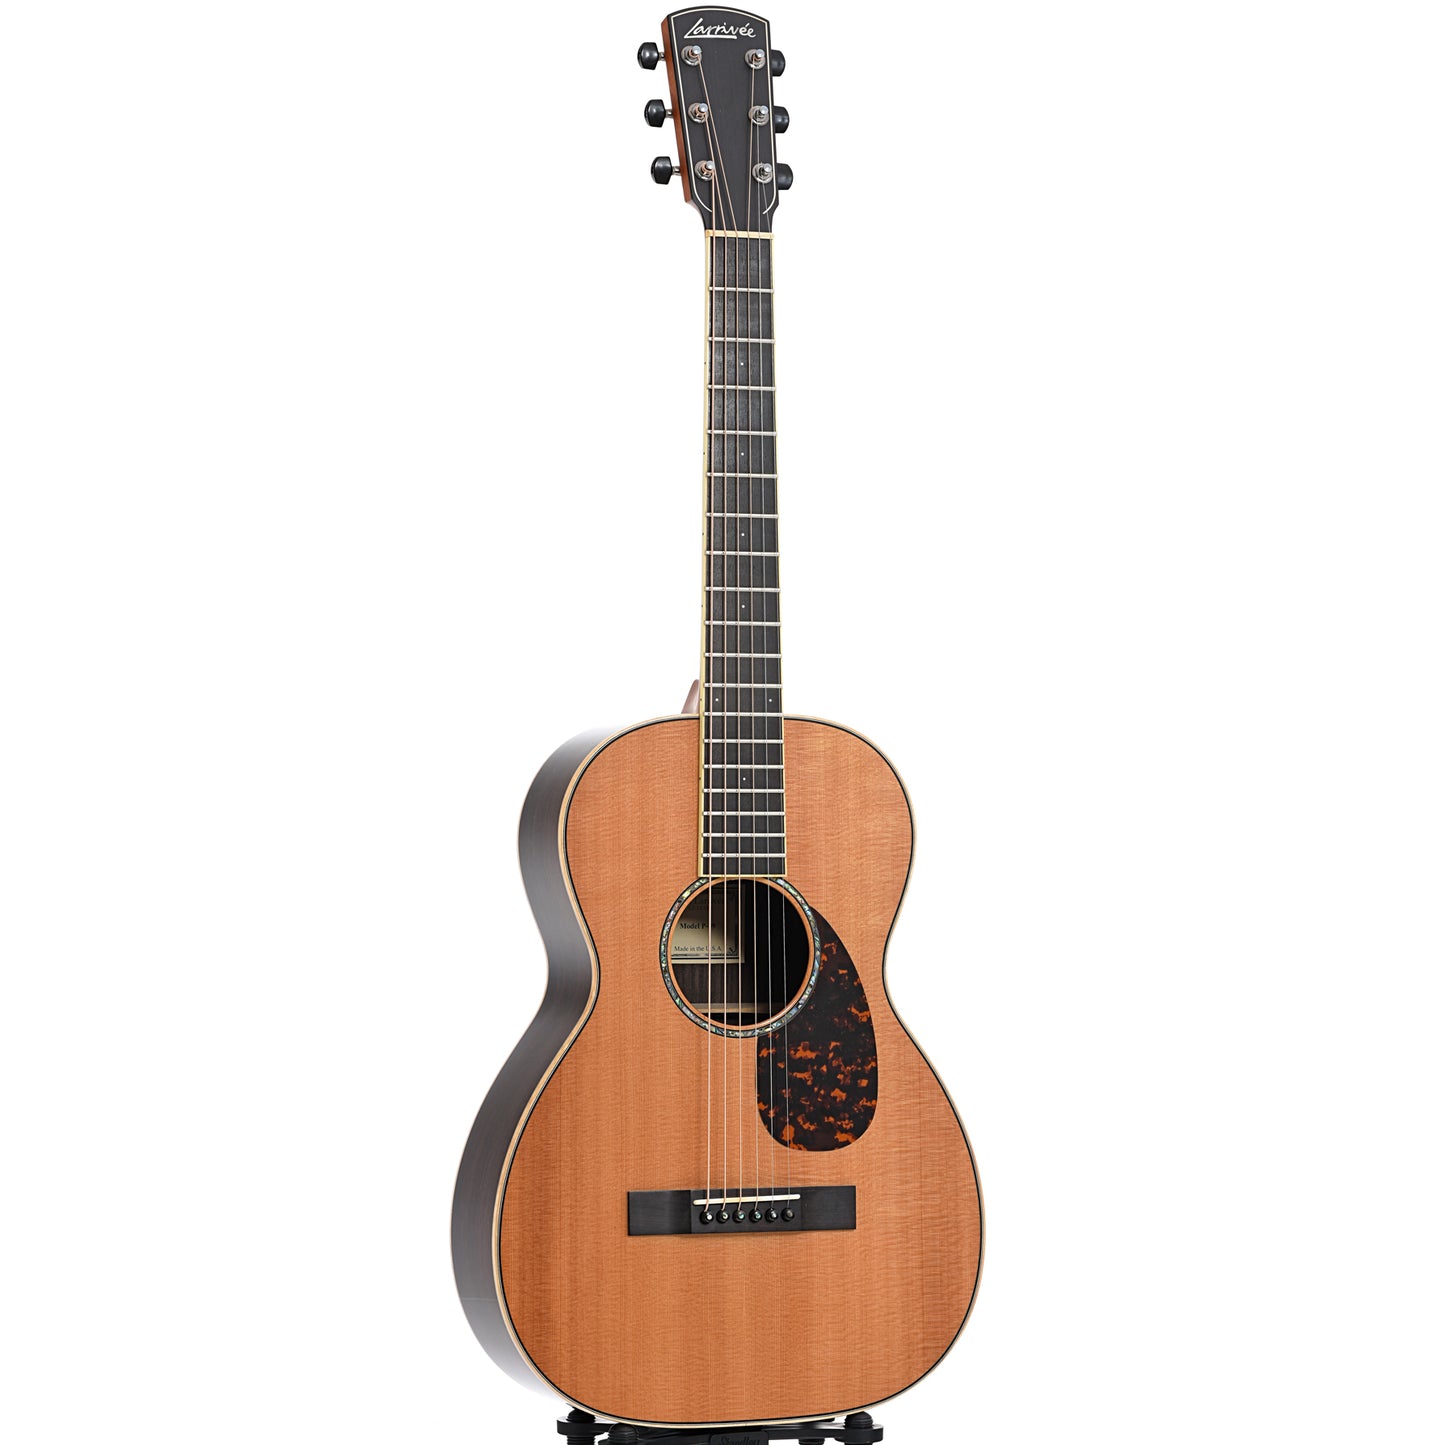 Full front and side of Larrivee P-09 Parlor Acoustic